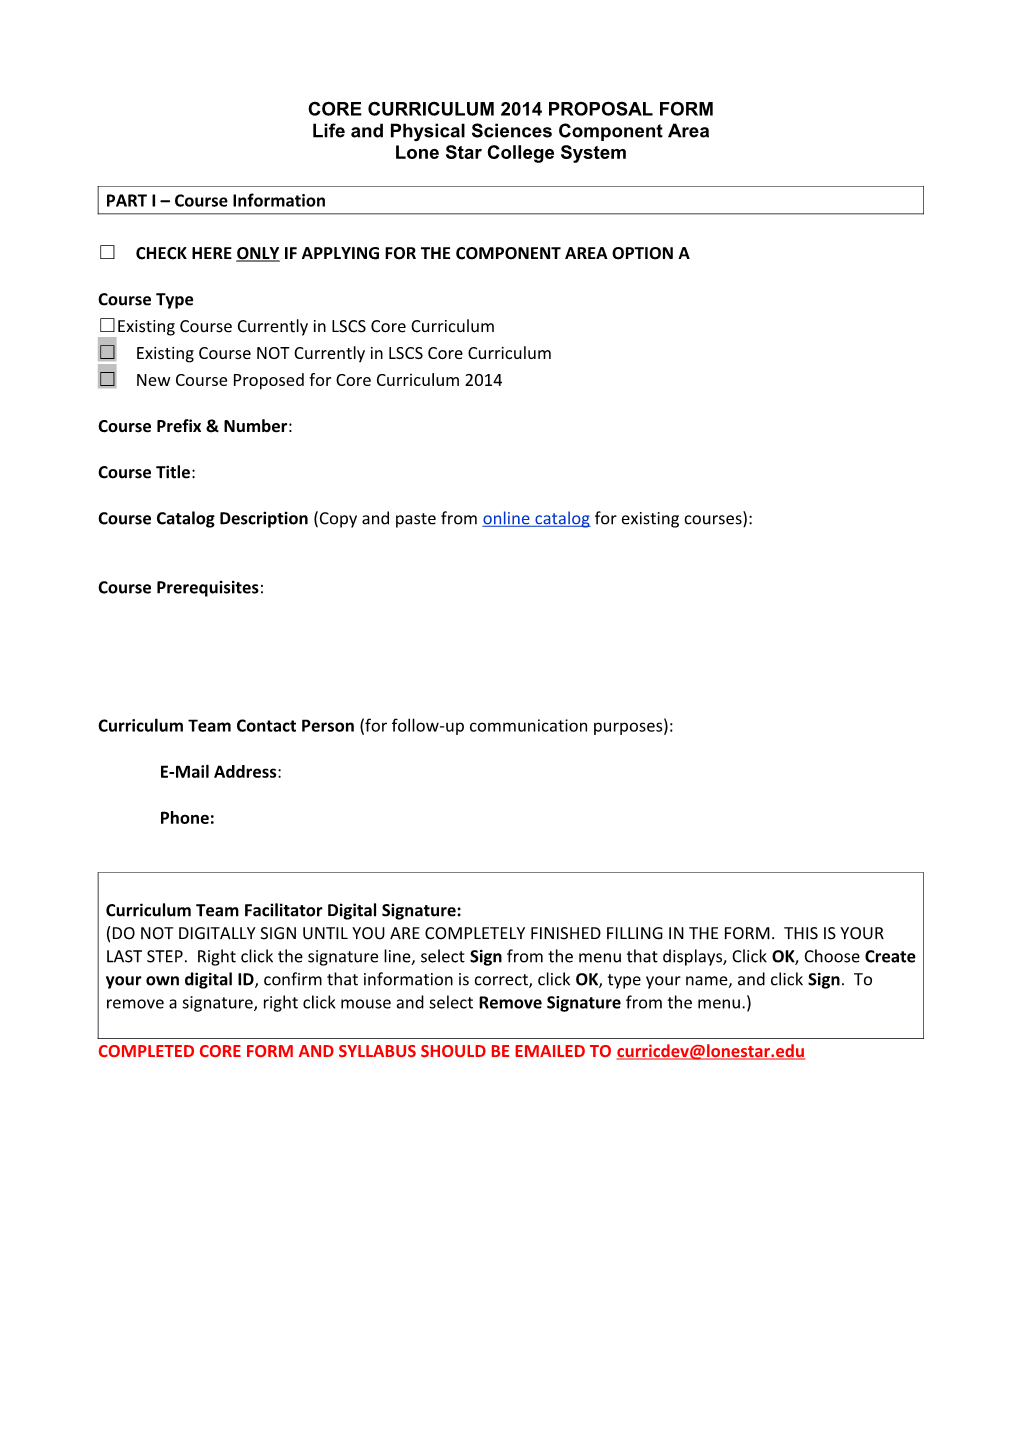 Core Curriculum 2014 Proposal Form